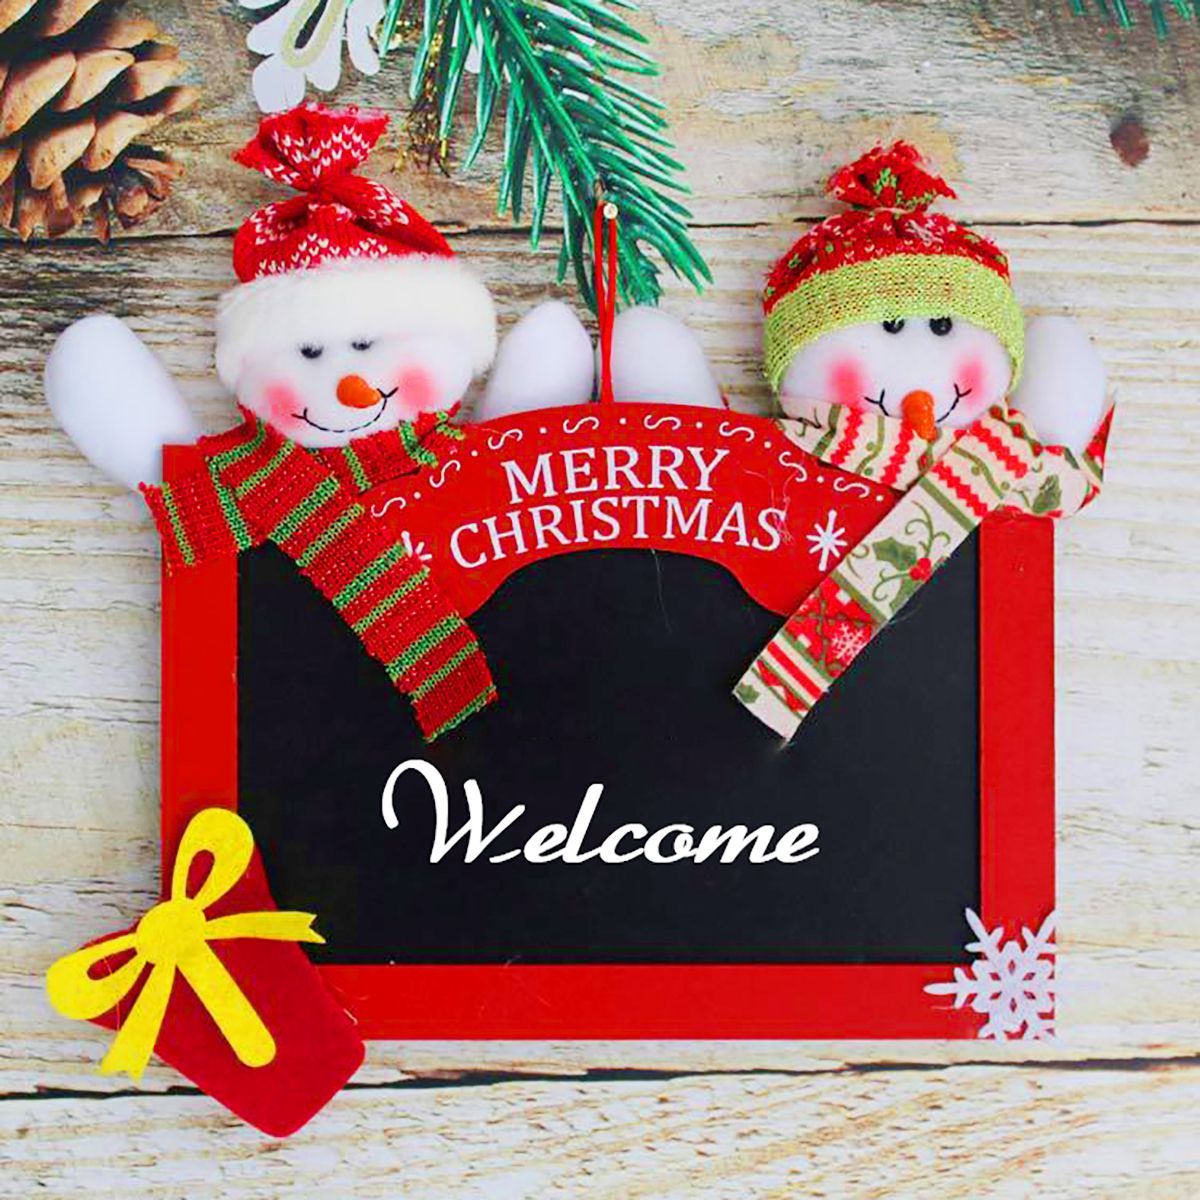 Merry-Christmas-Hanging-Sign-Wooden-Square-Blackboard-Wall-Door-Decoration-Hanging-Tags-for-DIY-Xmas-1904791